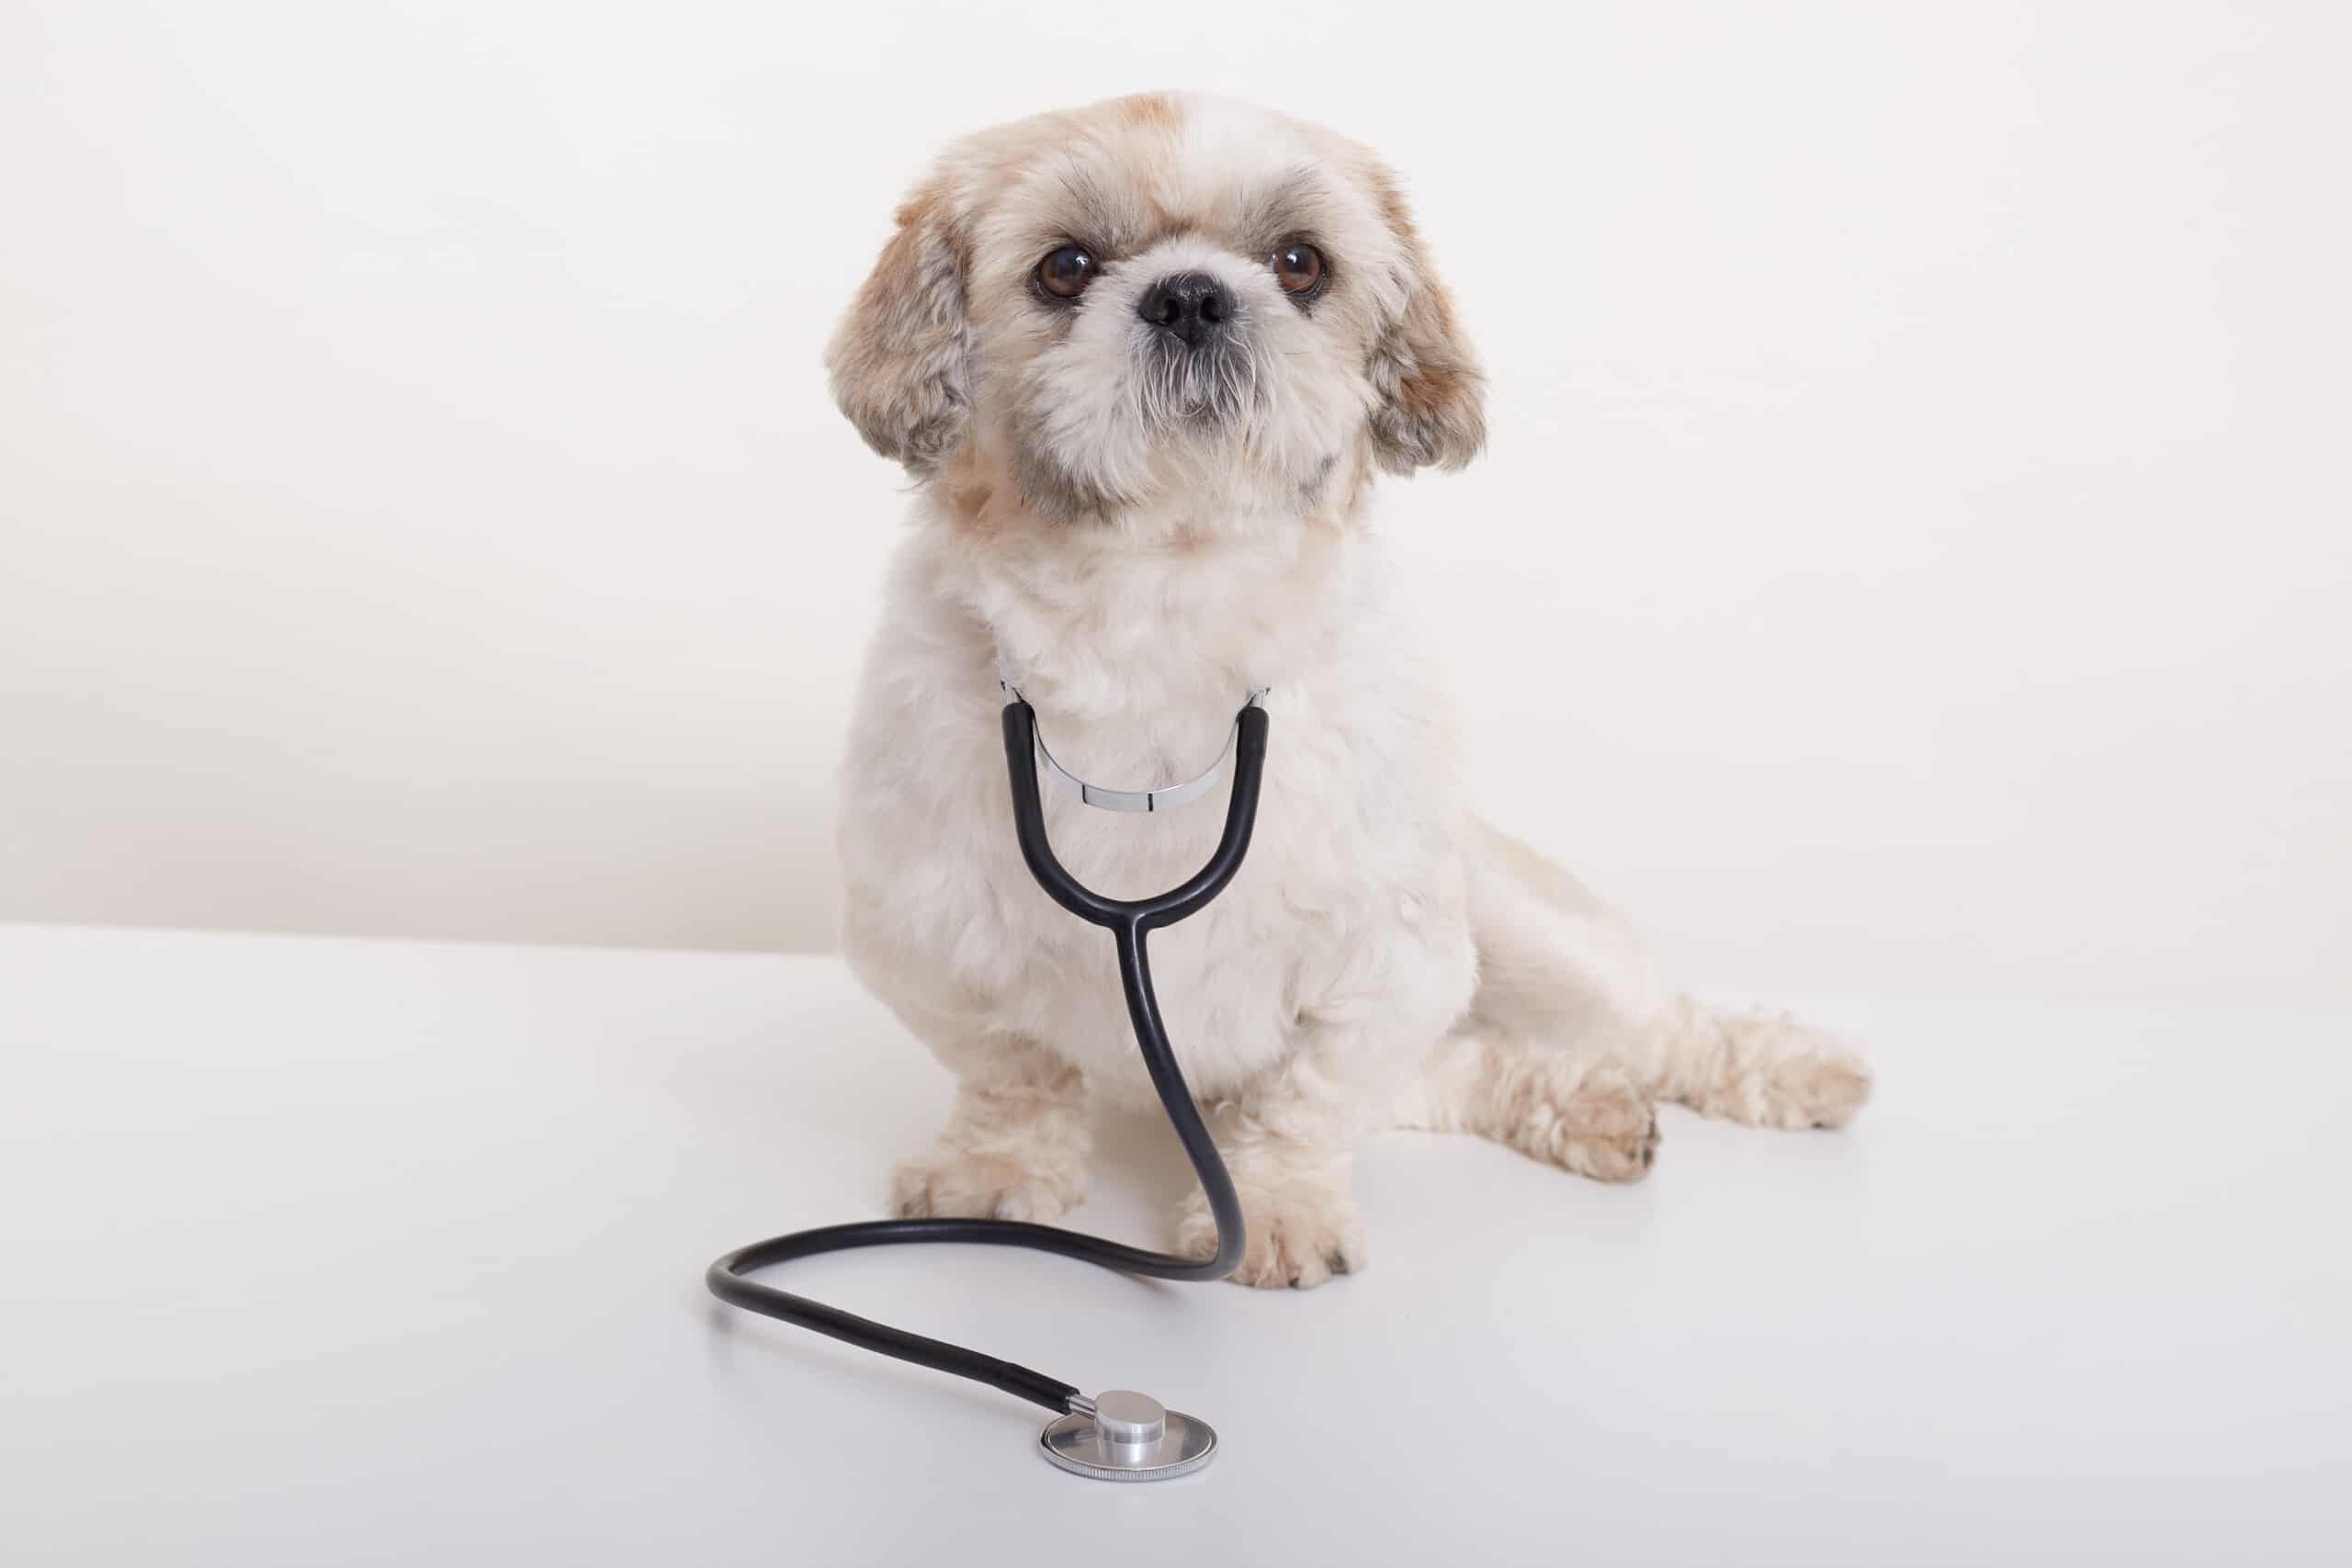 Learn about pre-existing conditions in pets